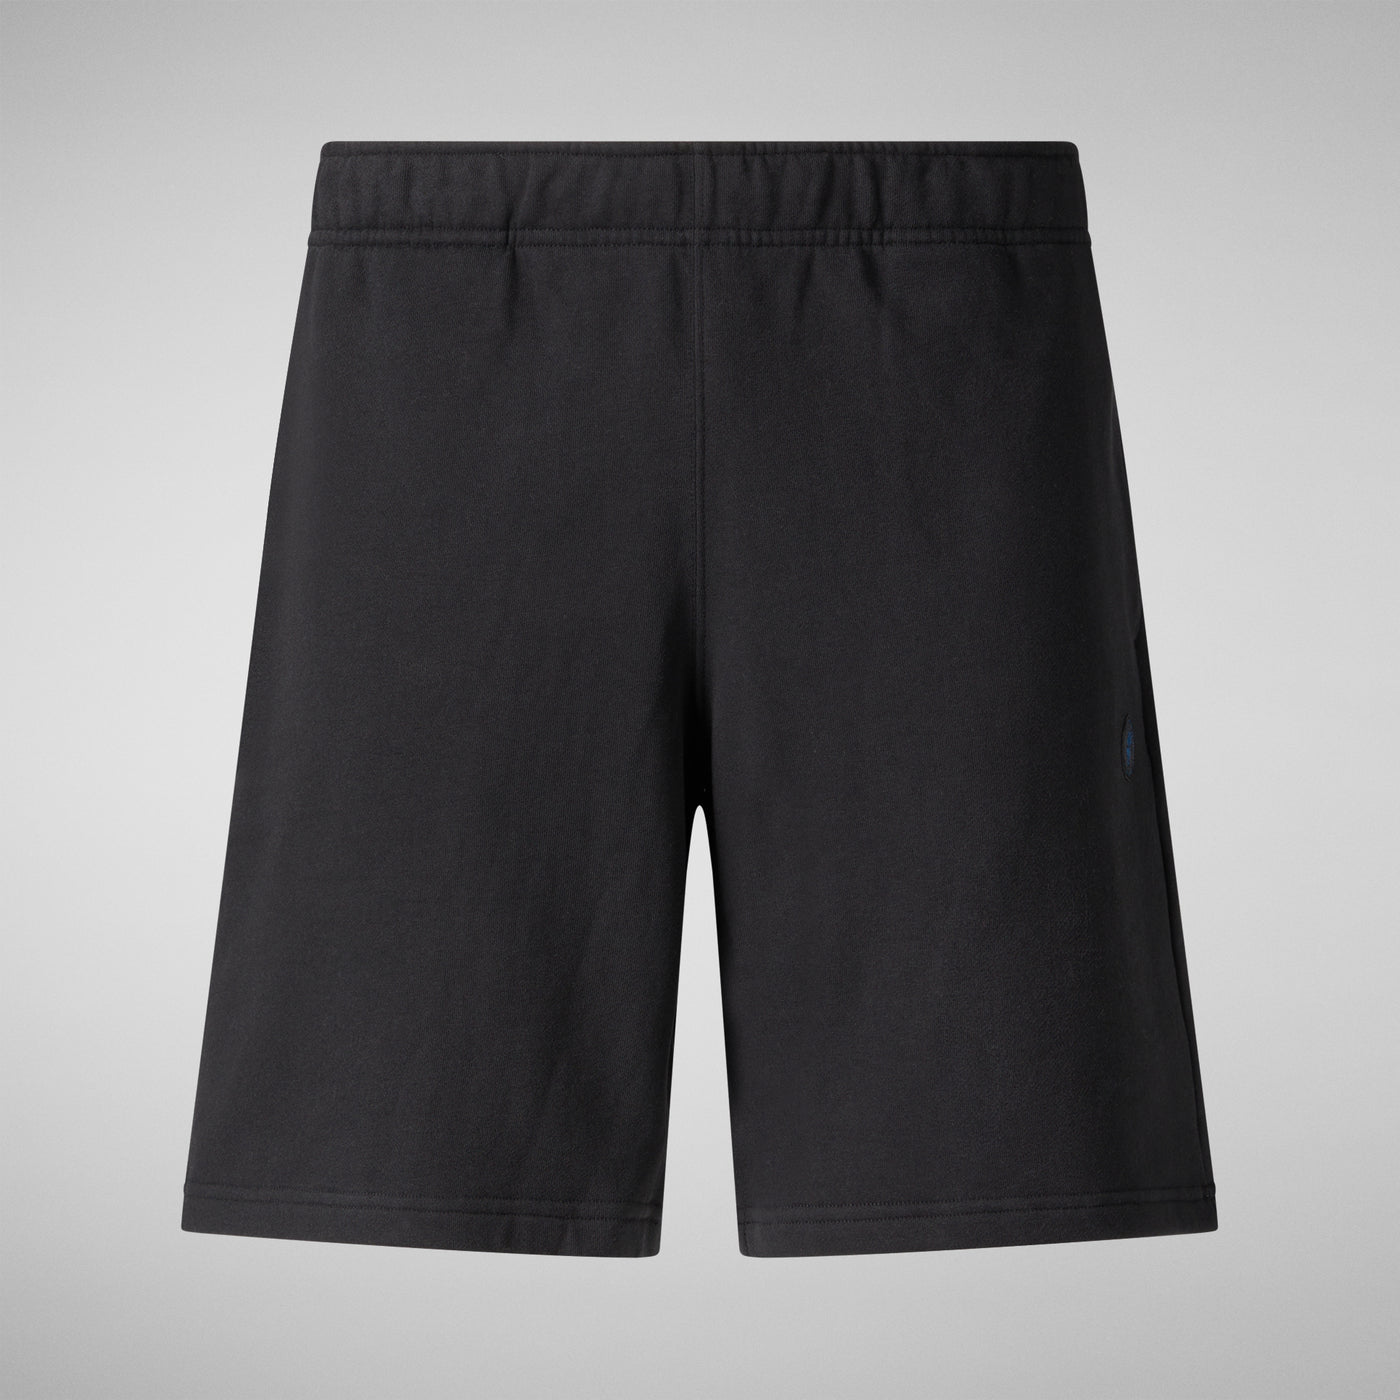 Product Front View of Men's Rayon Sweatshorts in Black